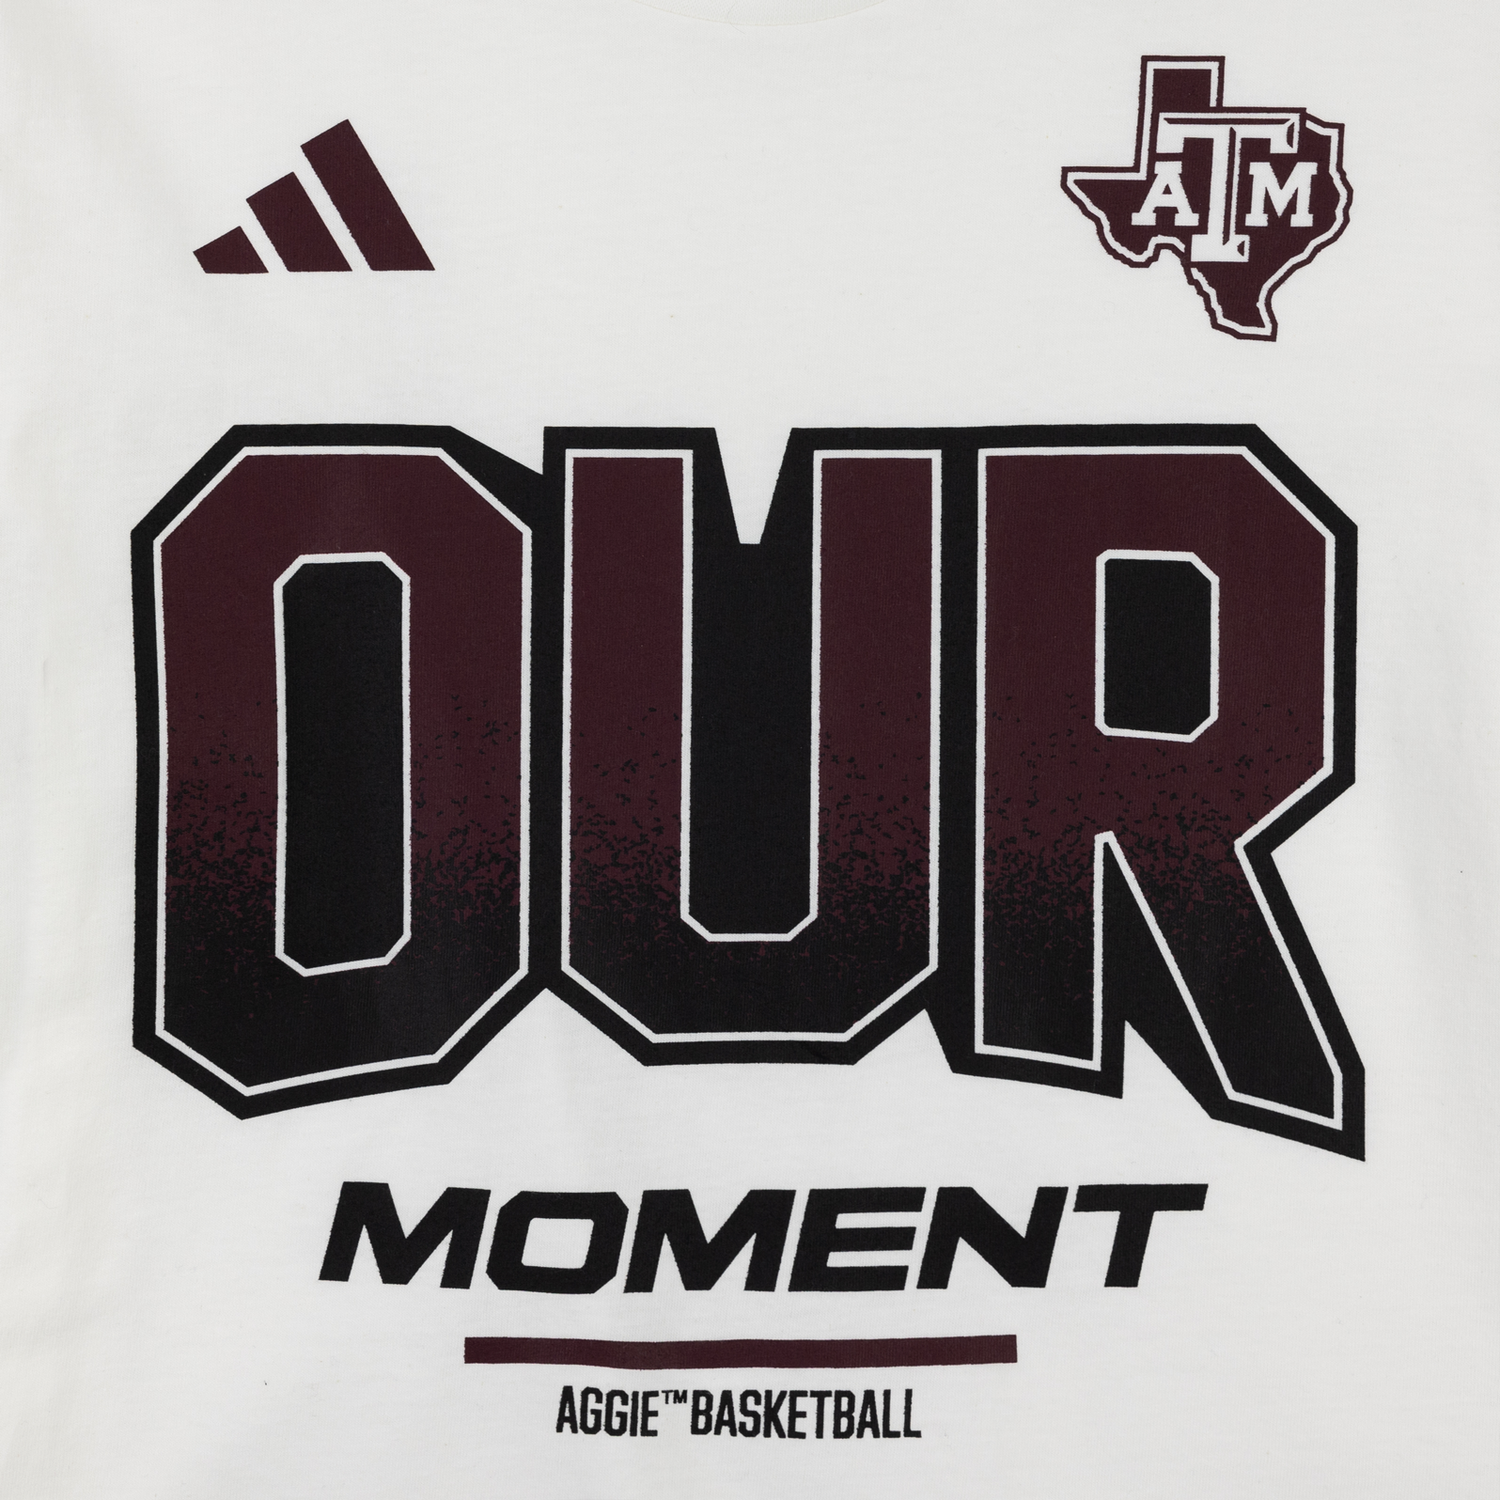 Texas A&M Our Moment Basketball T-Shirt